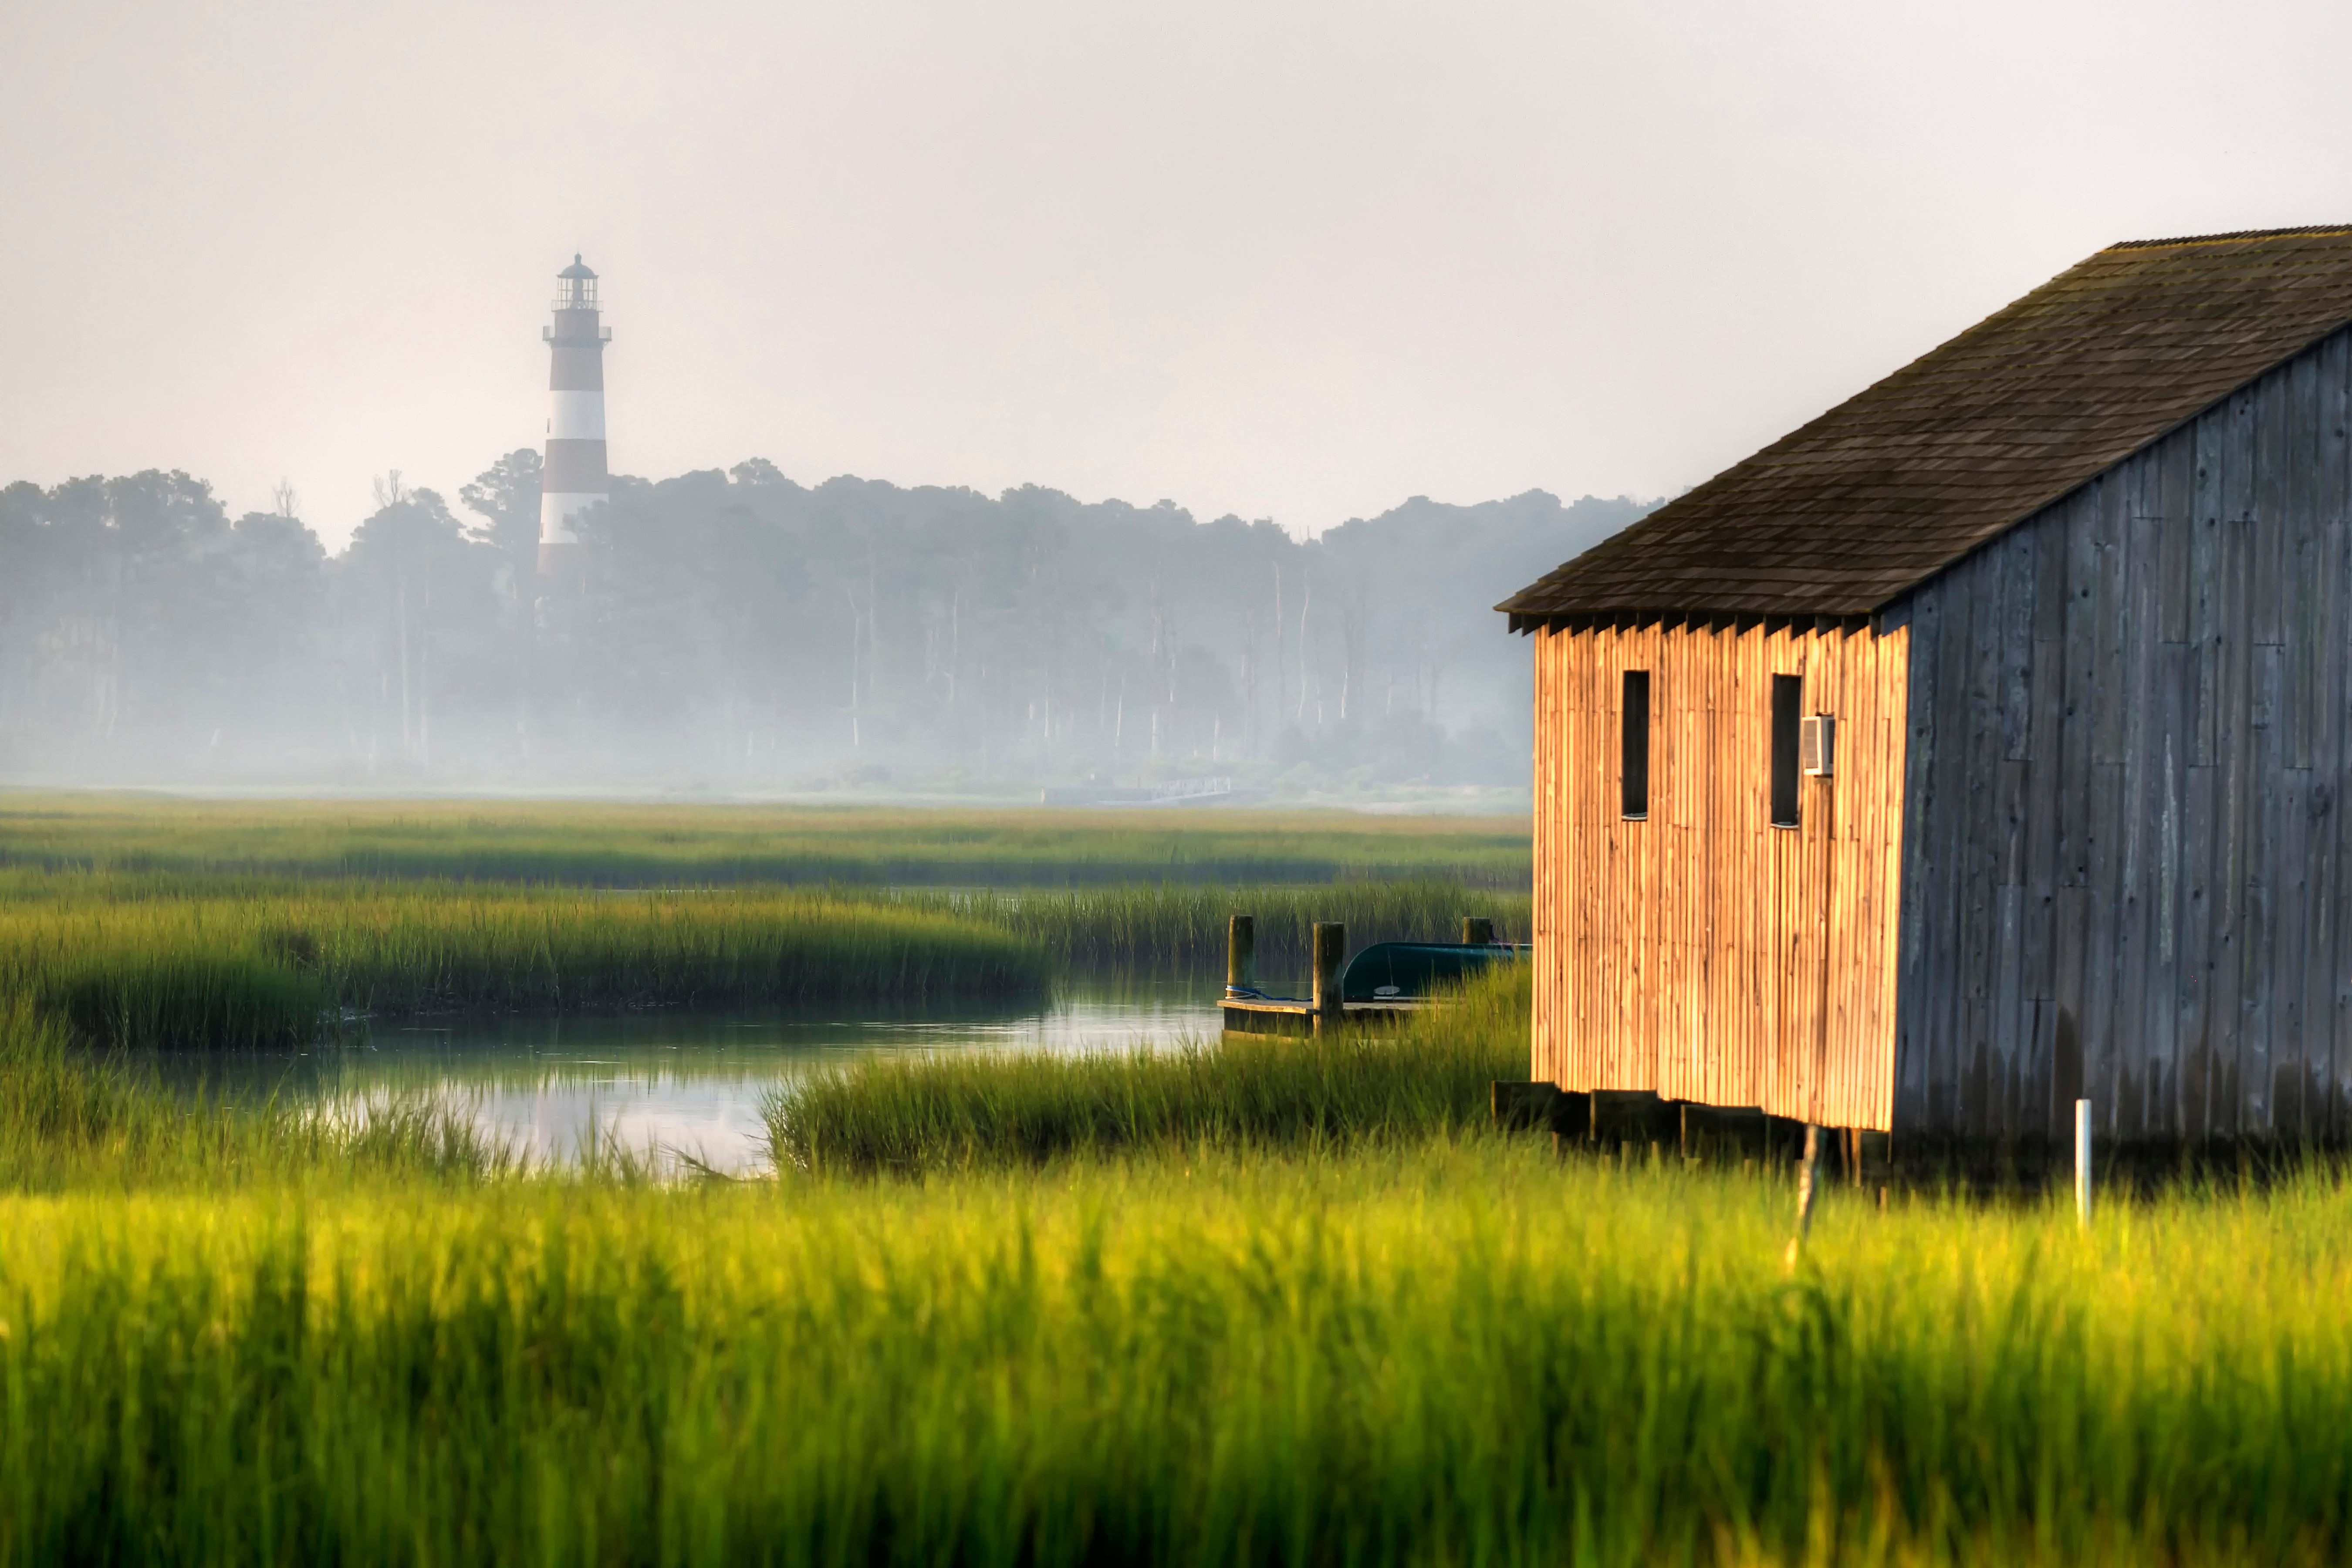 The Assateague lighthouse sits in the Chincoteague National Wildlife Refuge